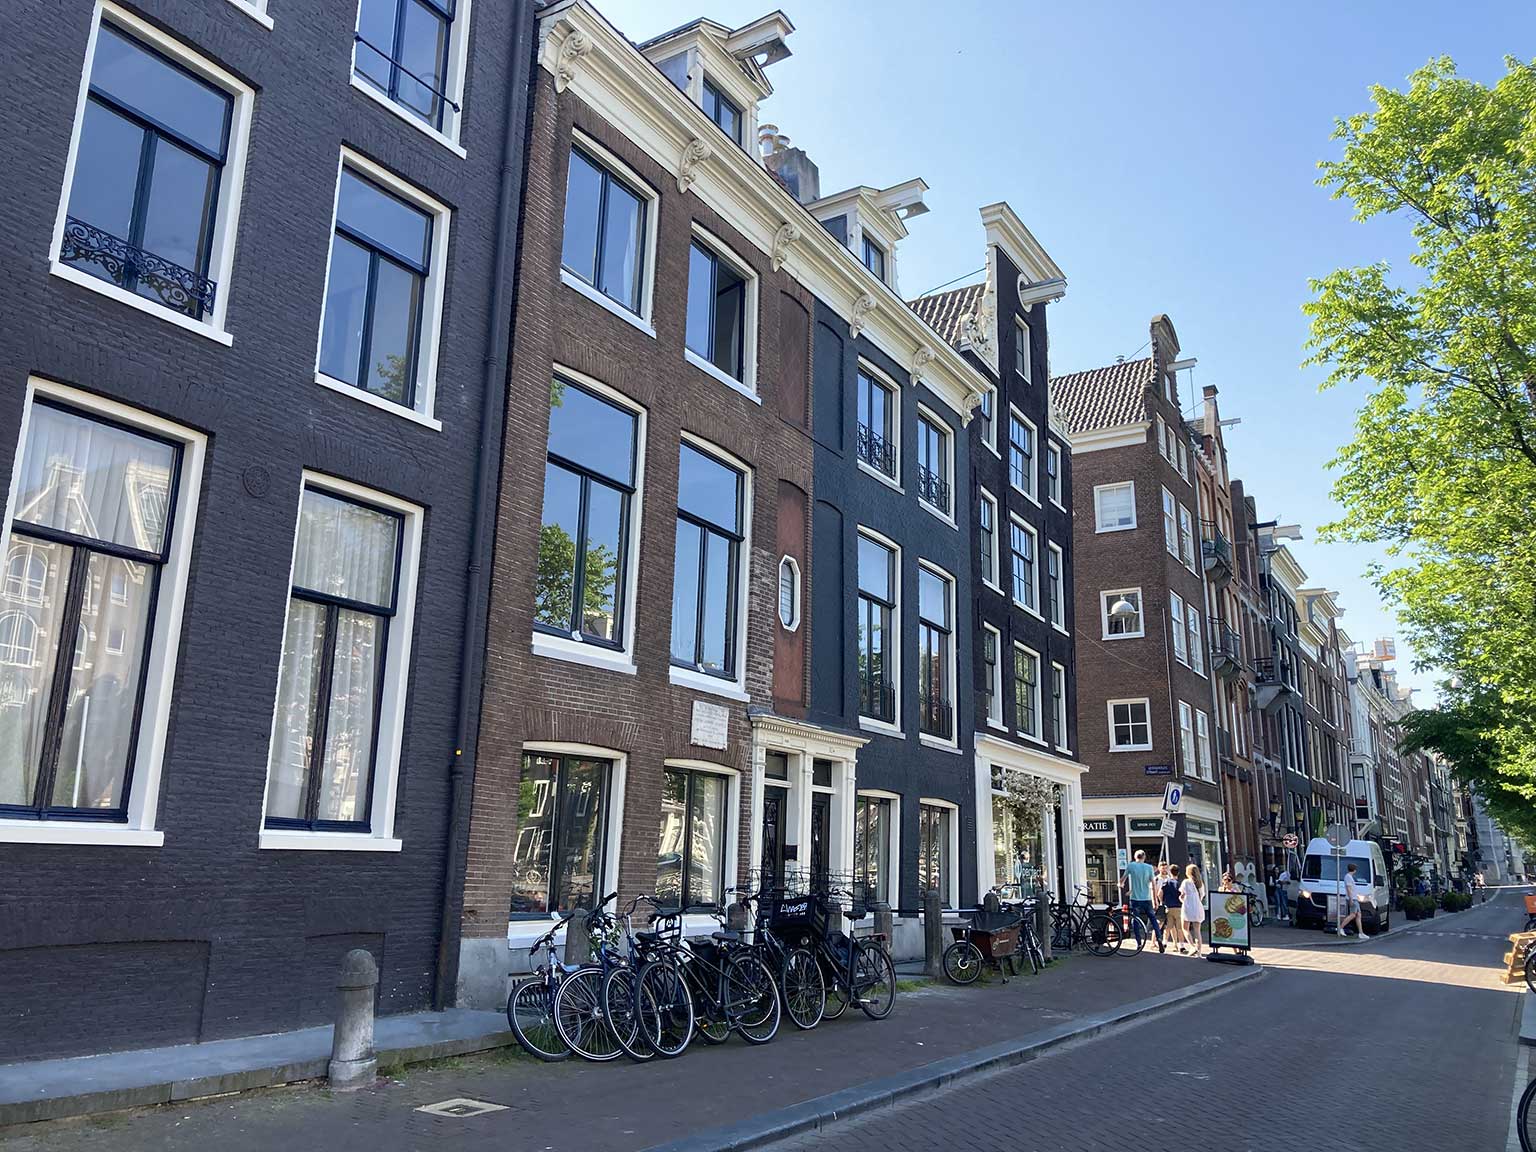 Prinsengracht, Amsterdam, with Locatelli's house at number 506